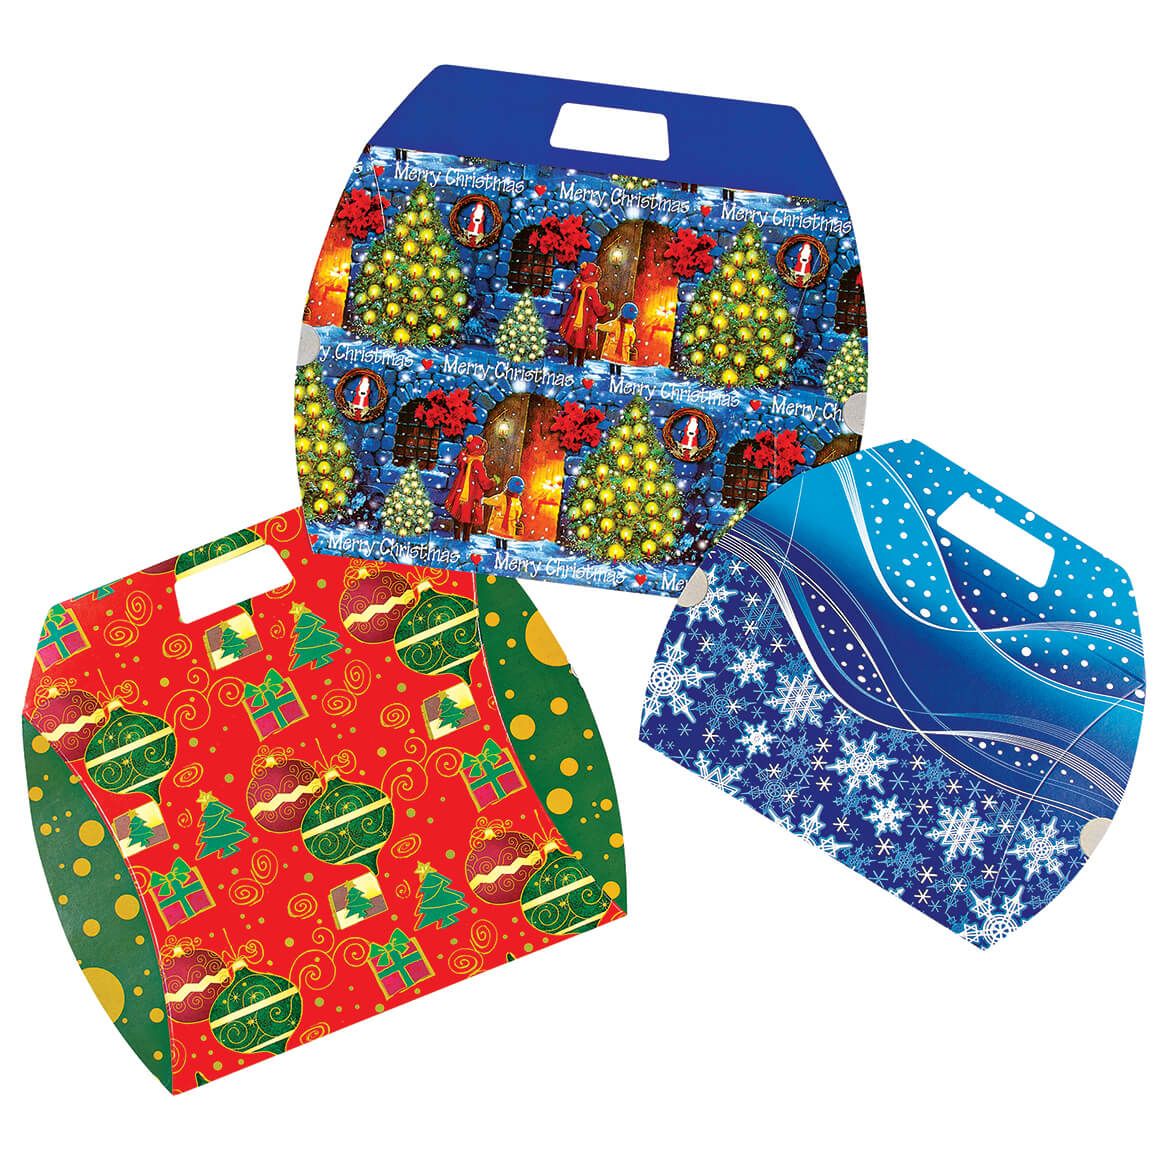 Assorted Christmas Gift Boxes, Set of 3 + '-' + 377536